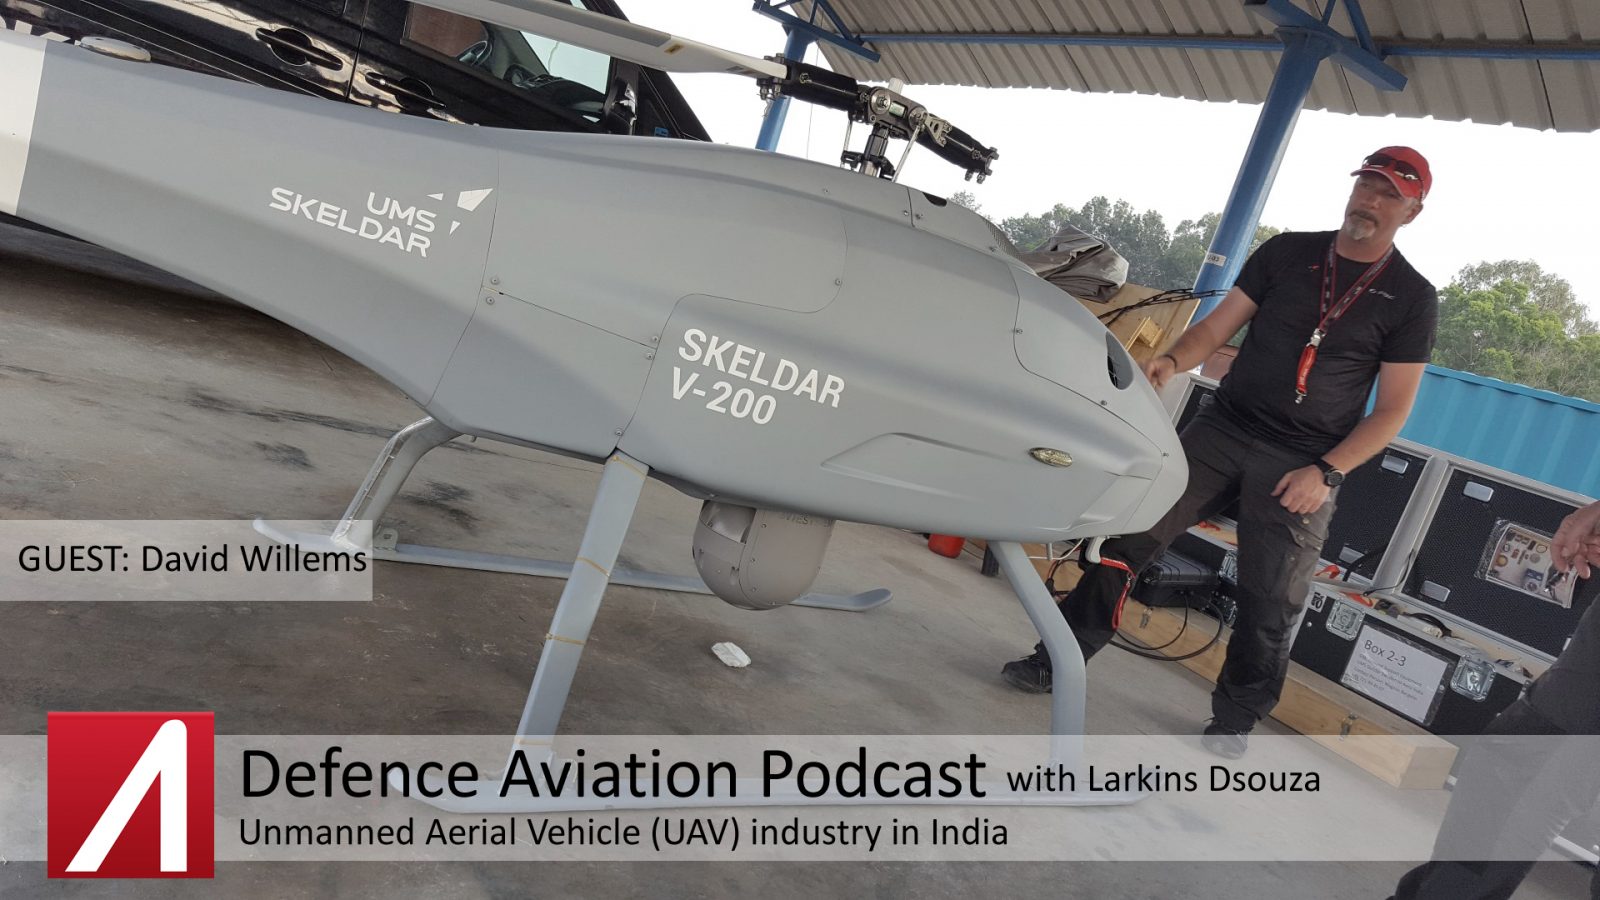 DA #5: LIVE from Aero India 2017 - Unmanned Aerial Vehicle (UAV) industry in India with David Willems of UMS Skeldar